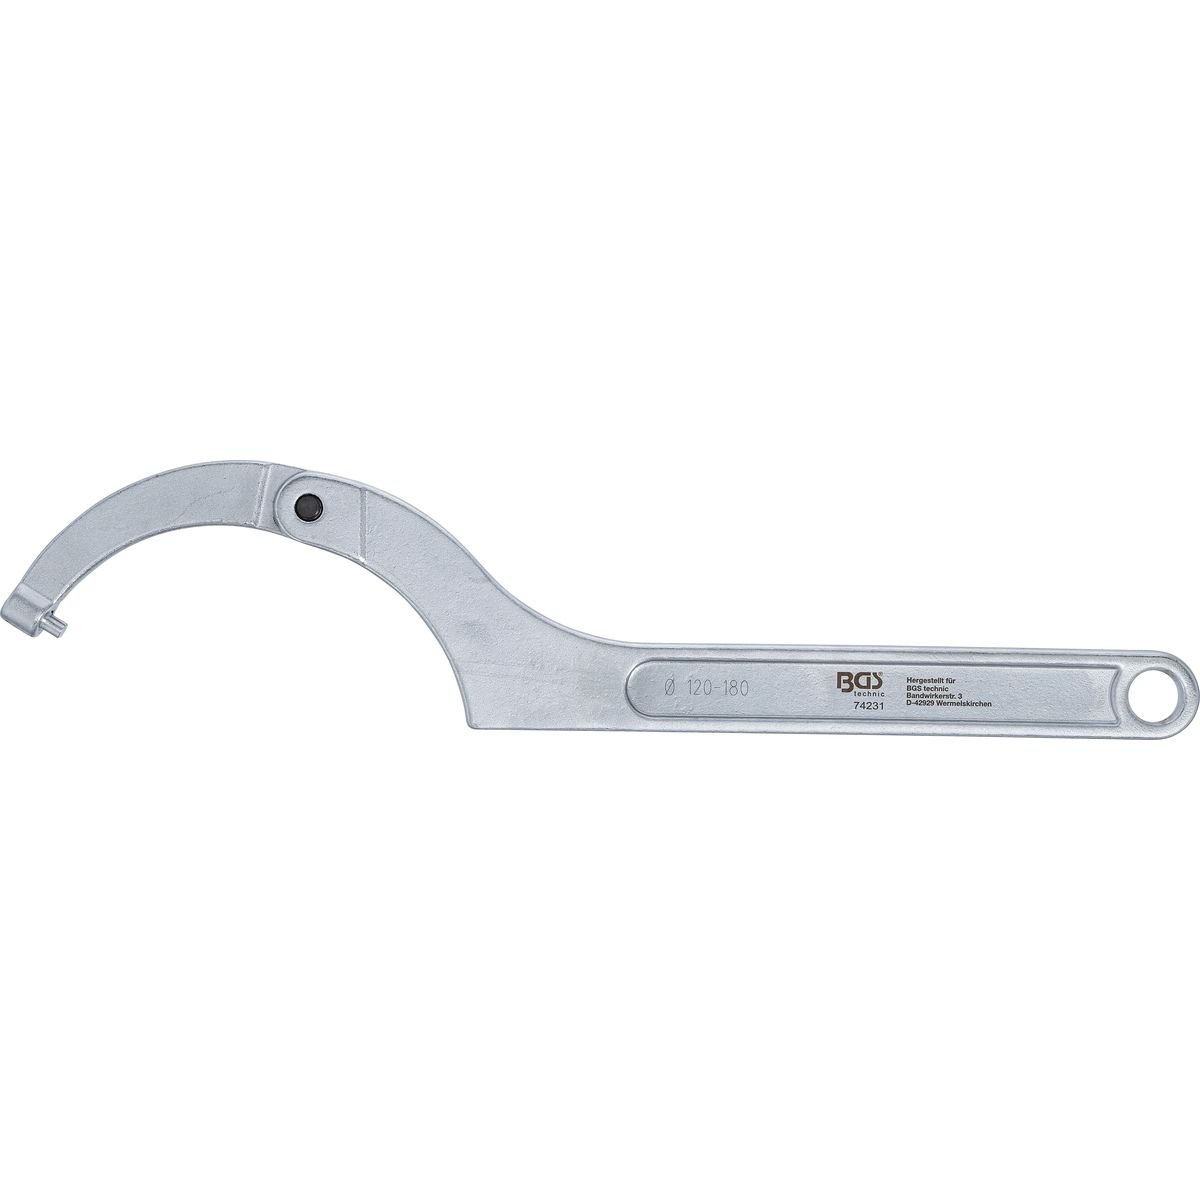 Adjustable Hook Wrench with Pin | 120 - 180 mm